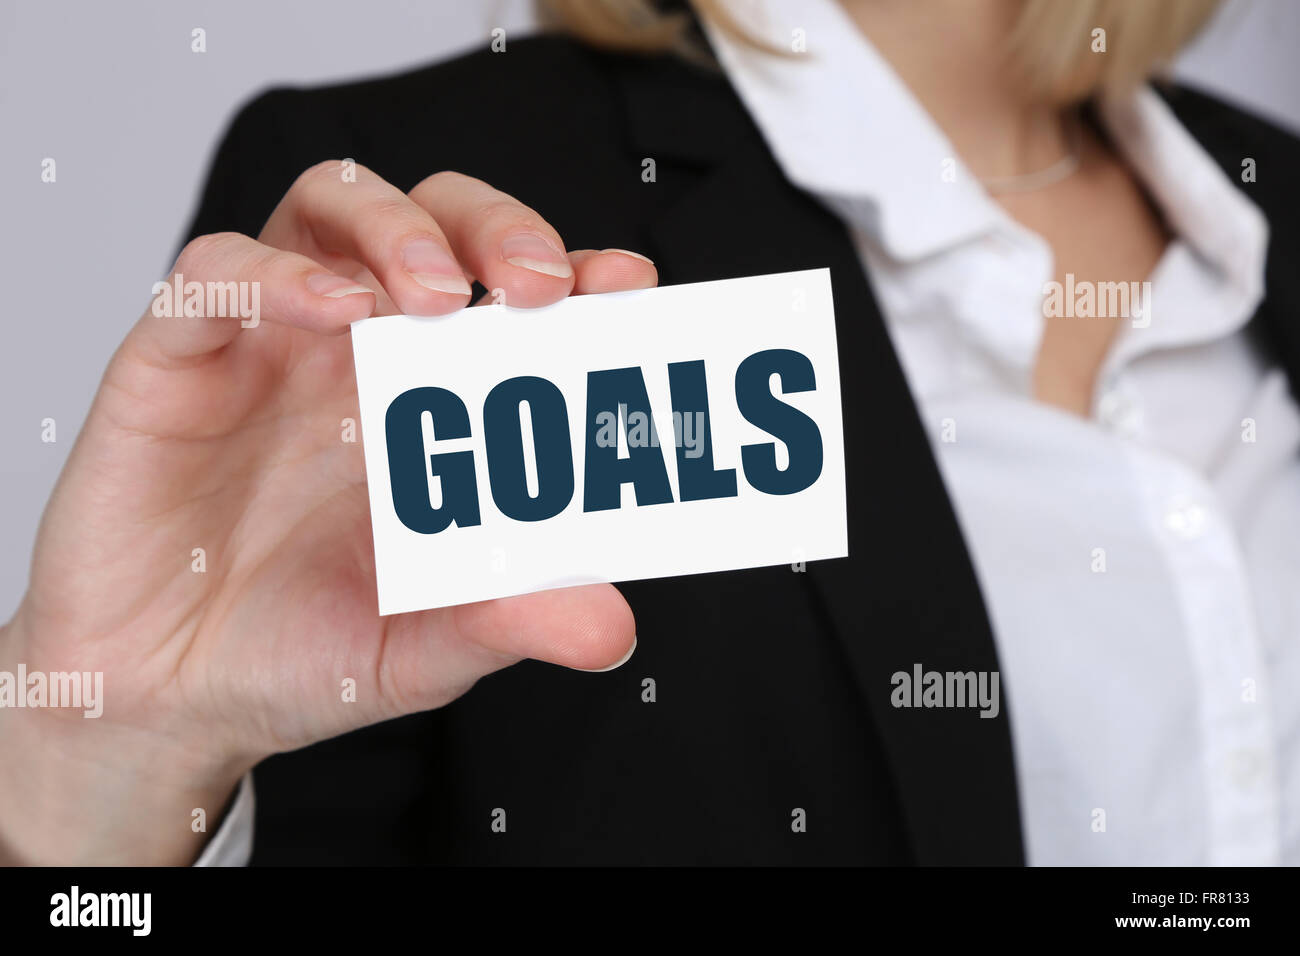 Goal goals to success aspirations and growth targets business concept Stock Photo